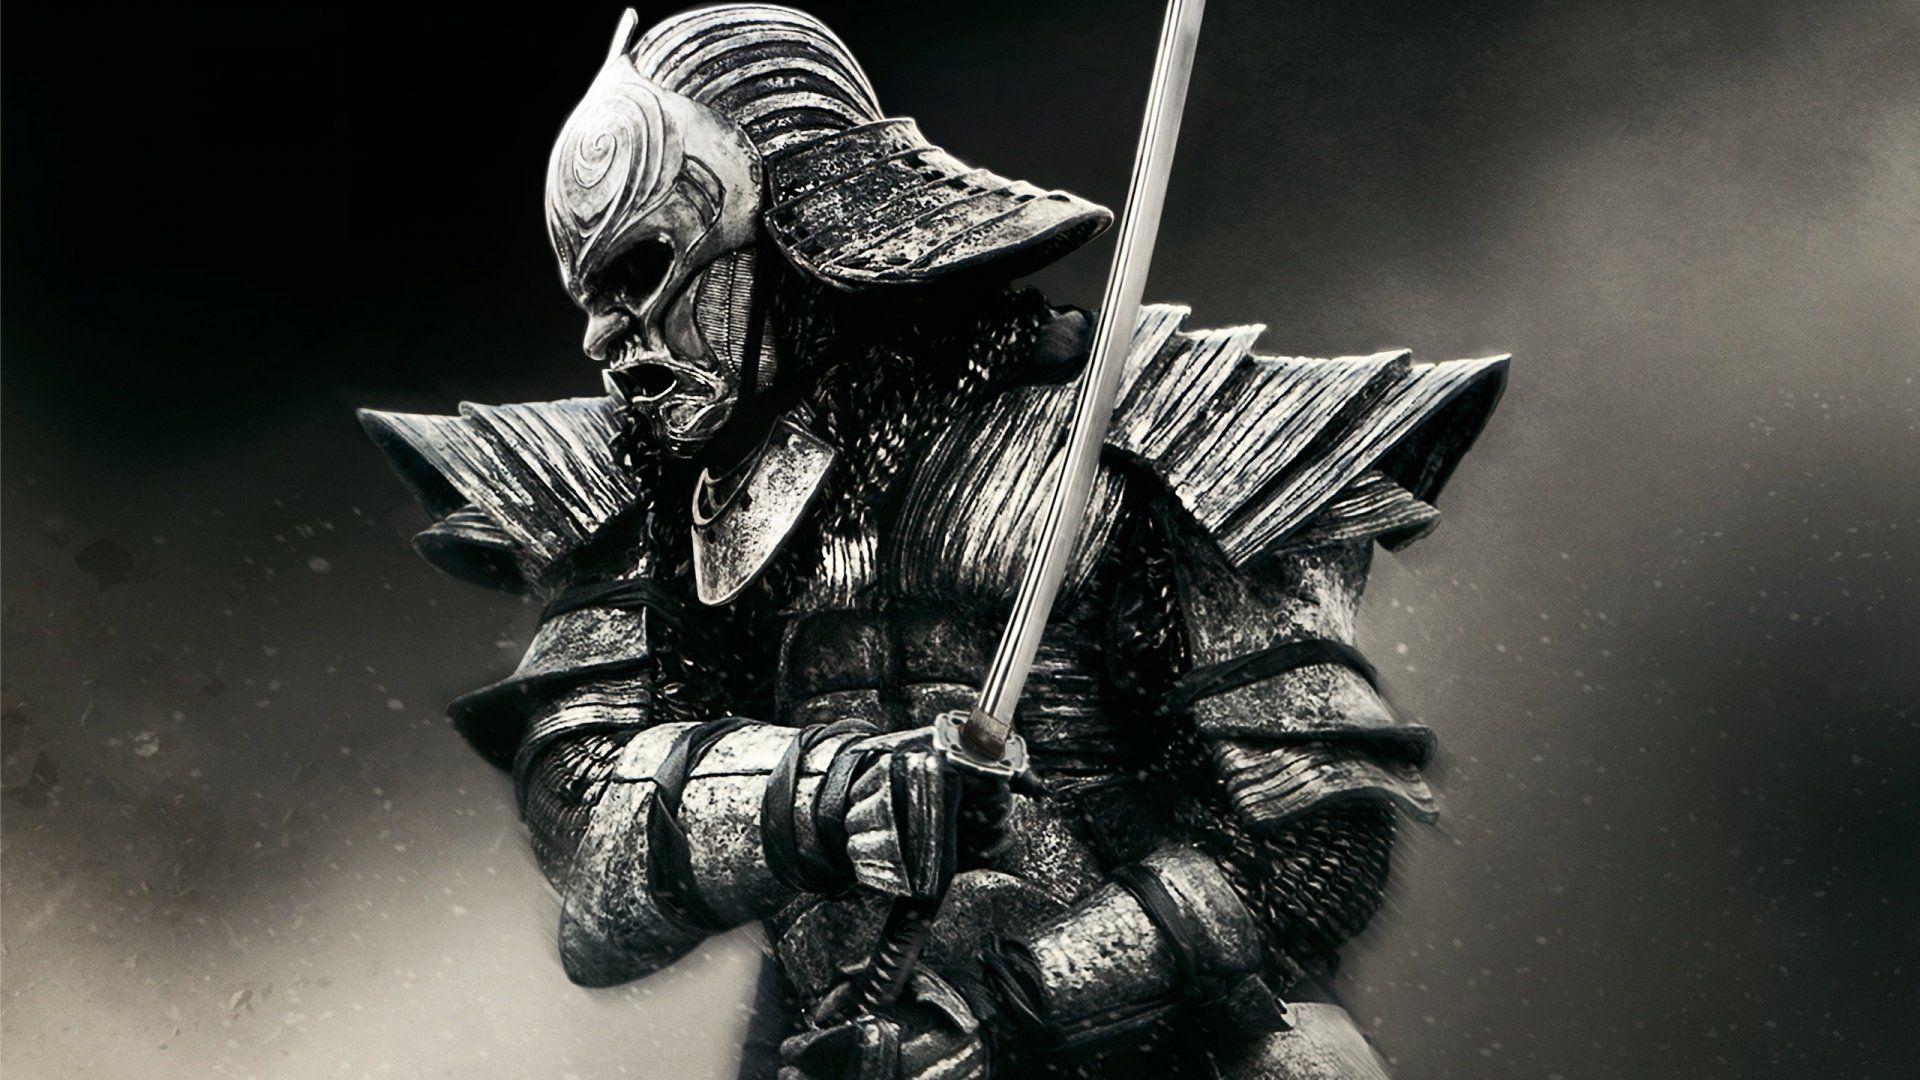 310+ Fantasy Samurai HD Wallpapers and Backgrounds